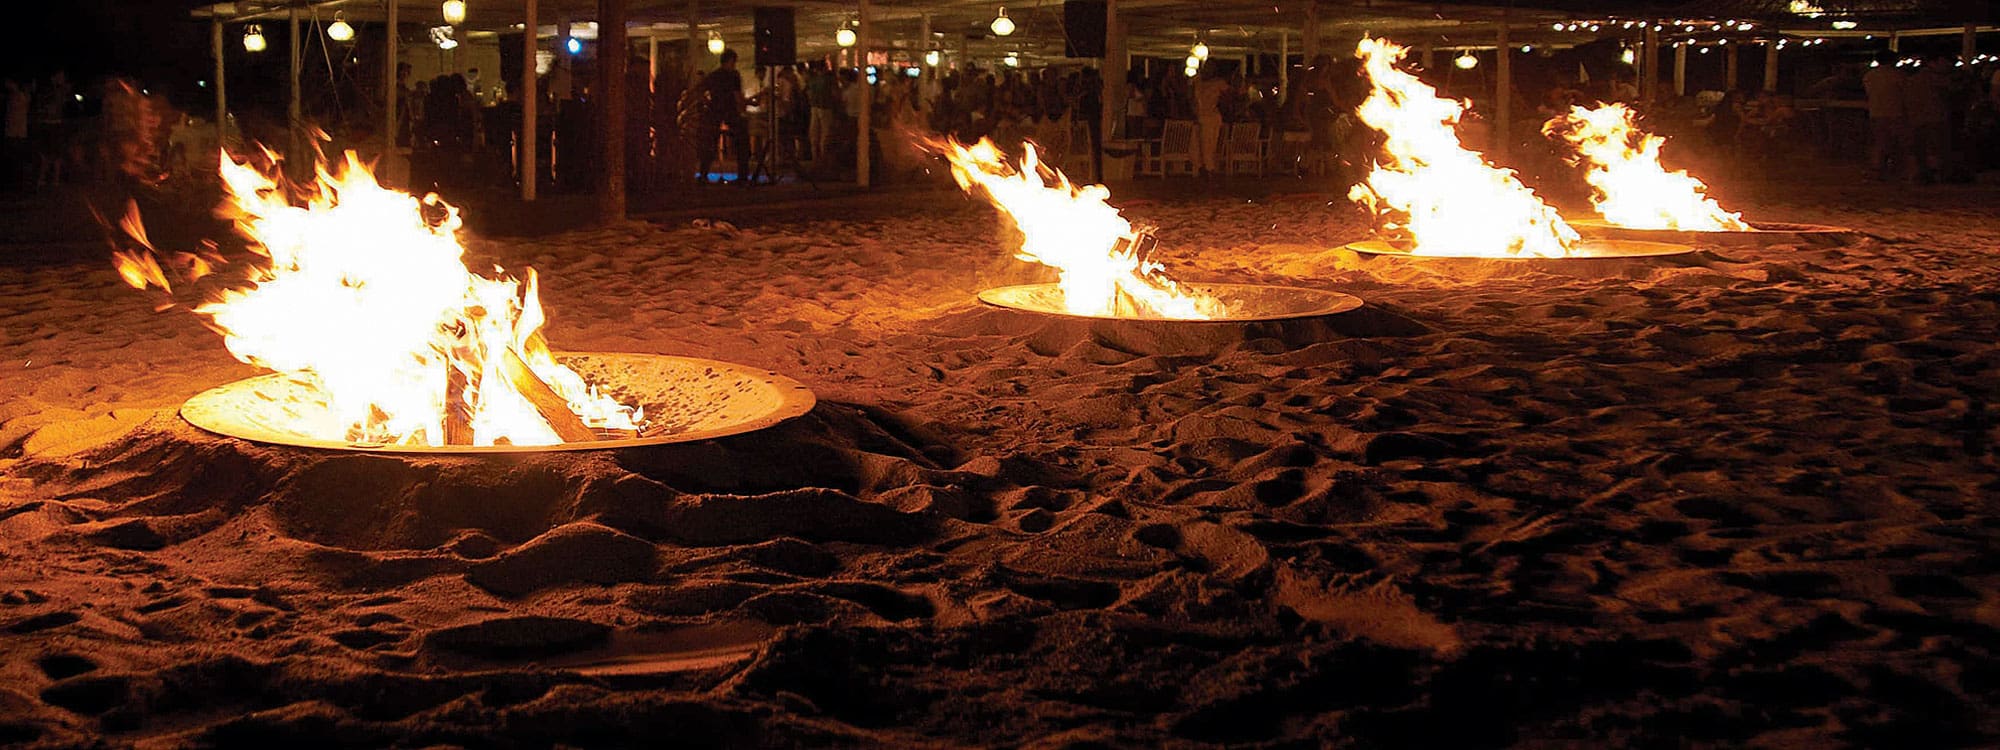 Image of row of AK47 Hole recessed fire pits dramatically burning on a dark nighttime beach